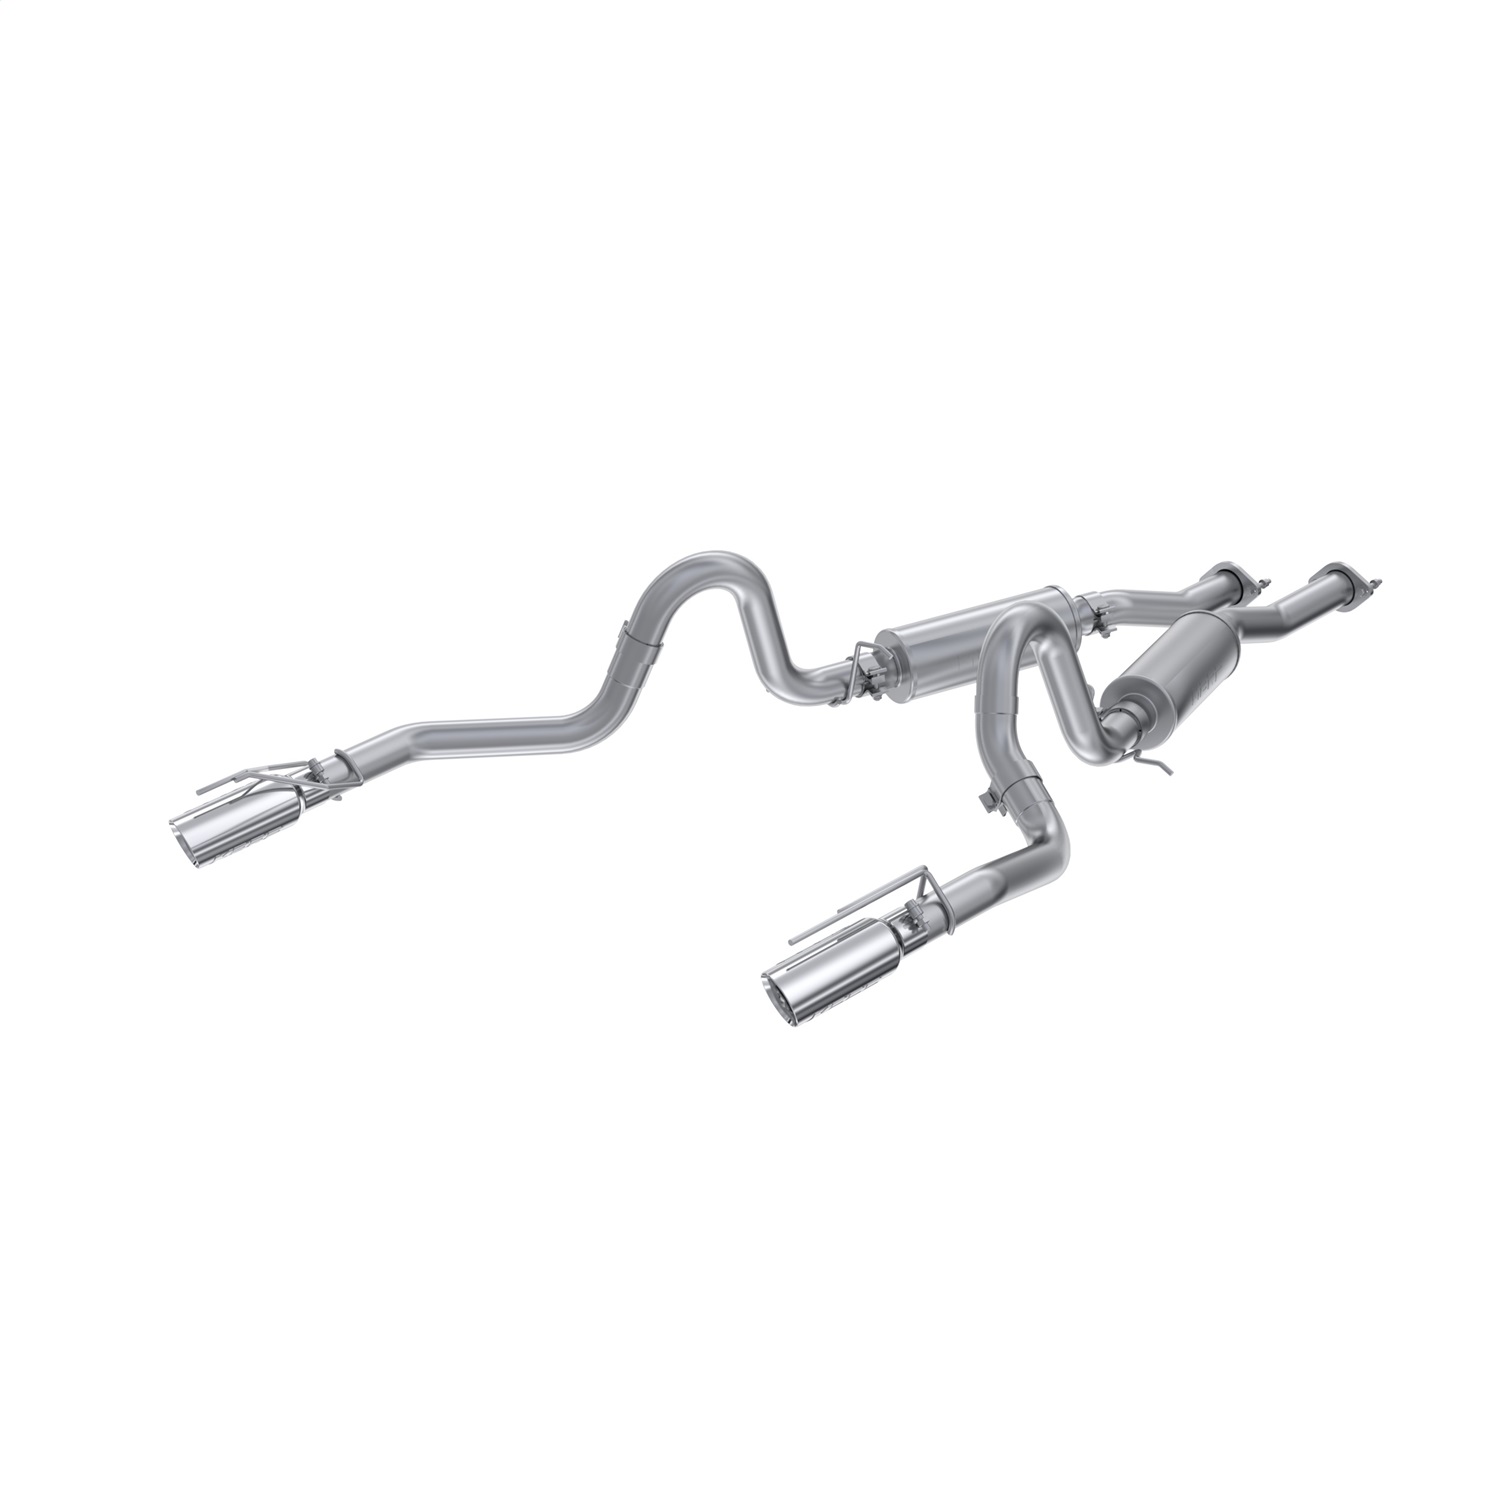 MBRP Exhaust S7221AL Armor Lite Cat Back Exhaust System Fits 99-04 Mustang